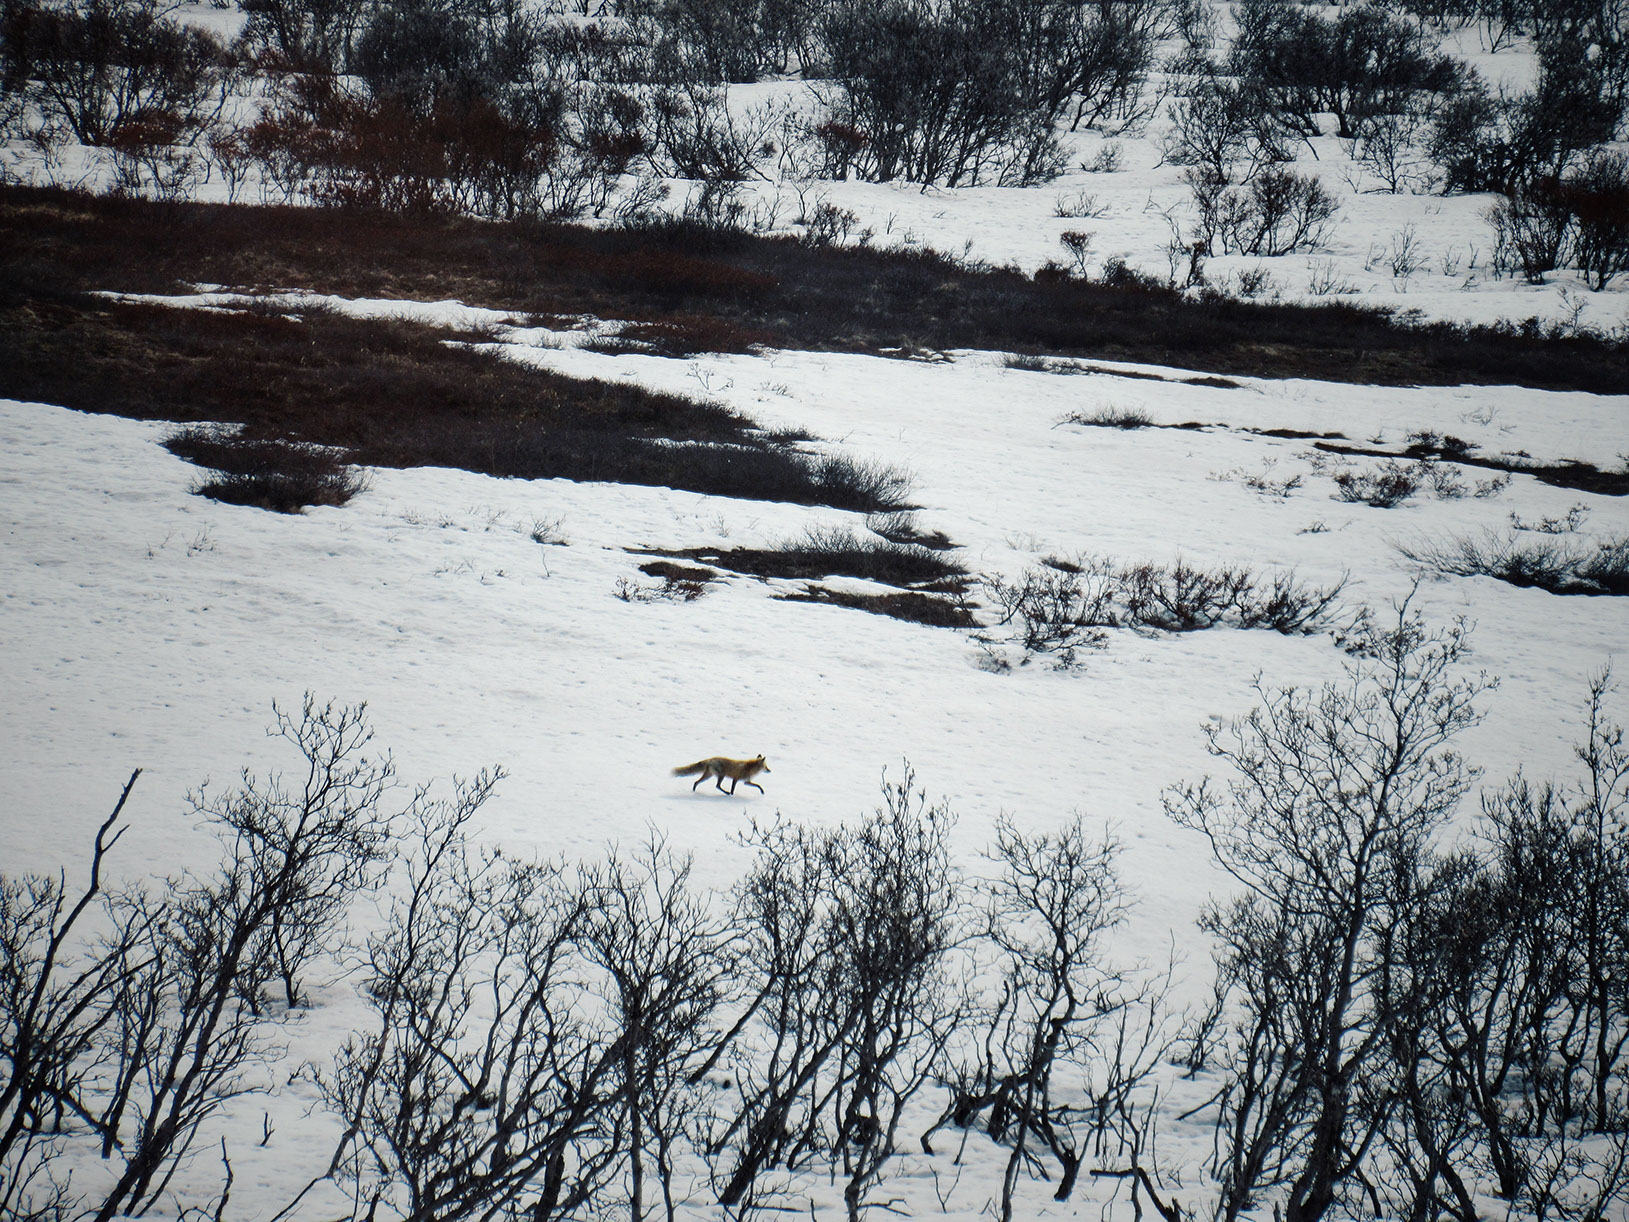 Red Fox strolling around the snow-covered Denali National Park in Alaska